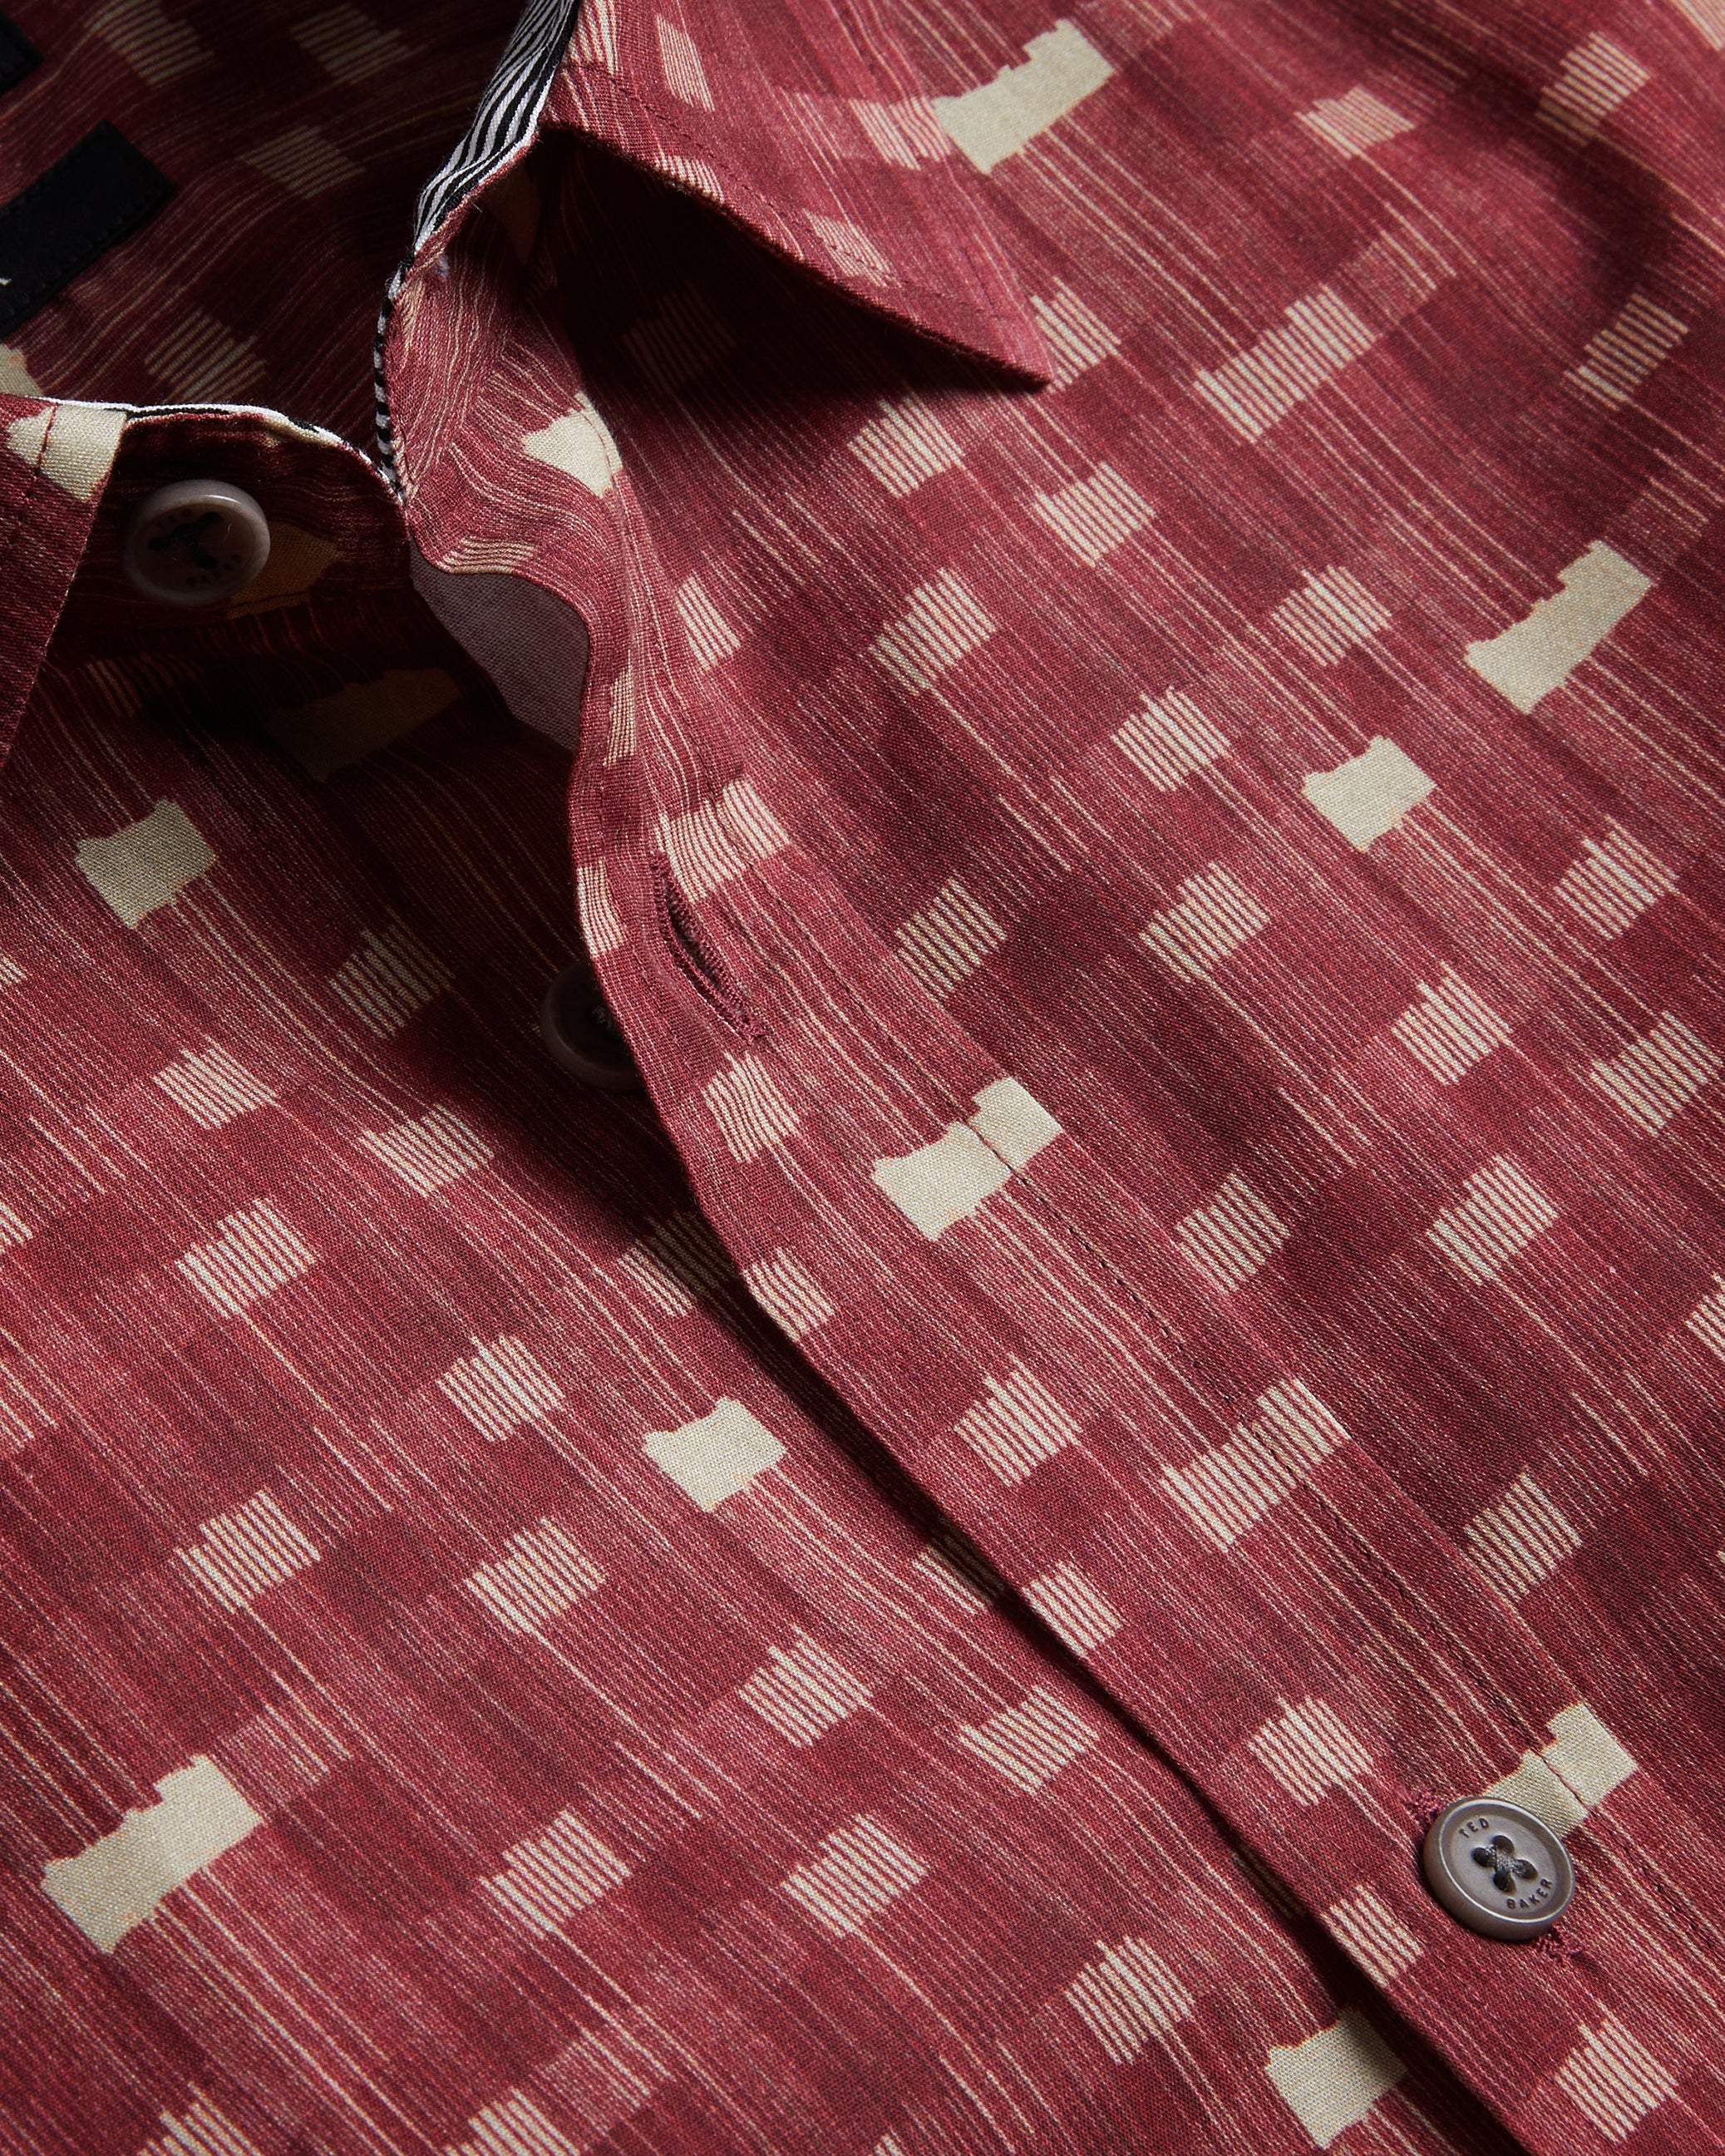 Chazbe Ss Ombre Check Shirt Burnt Red